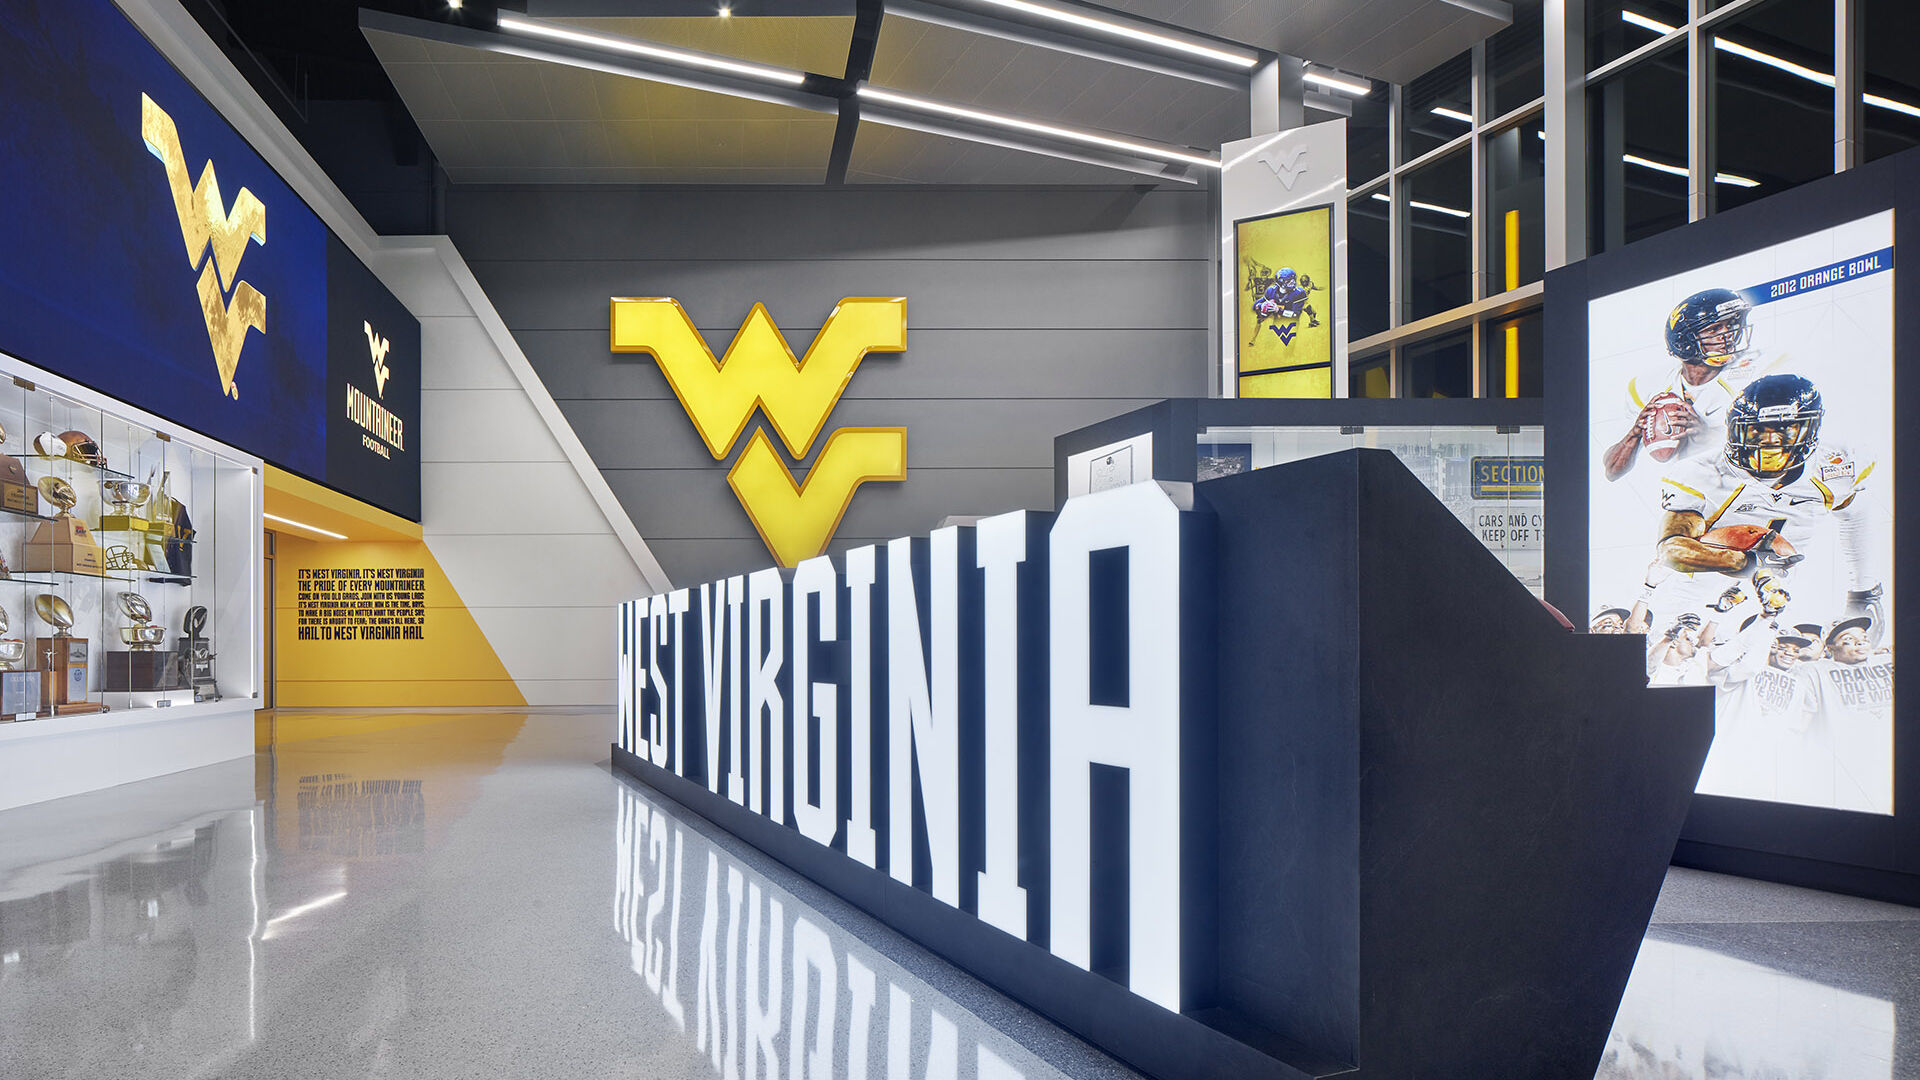 Large lighted dimensional letters at the West Virginia Football Hall of Traditions